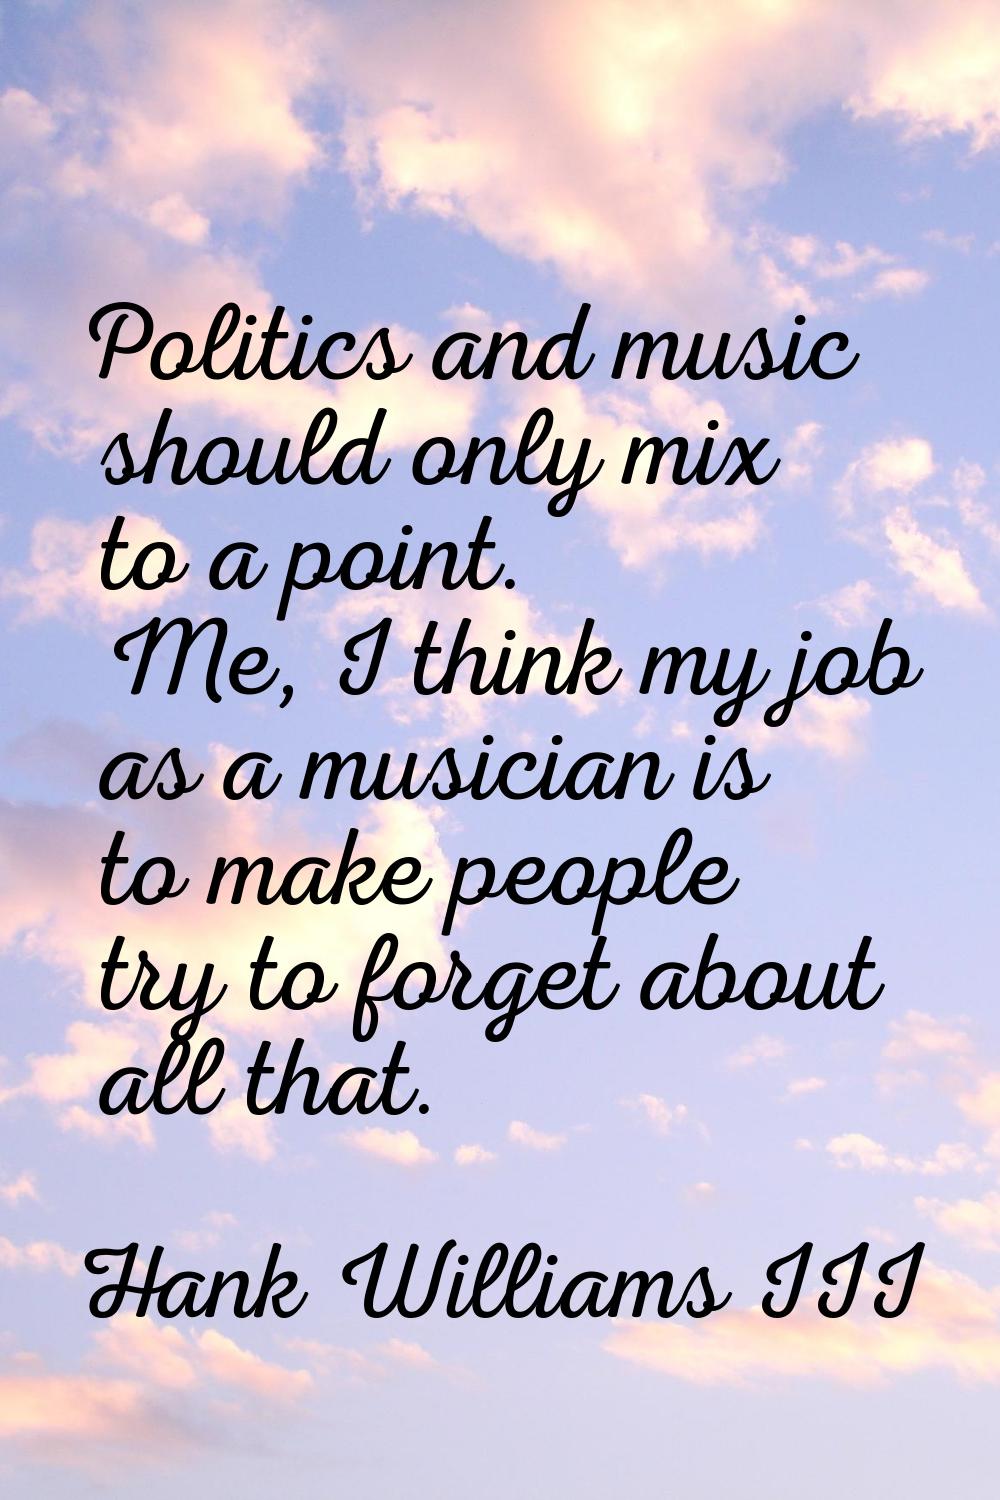 Politics and music should only mix to a point. Me, I think my job as a musician is to make people t